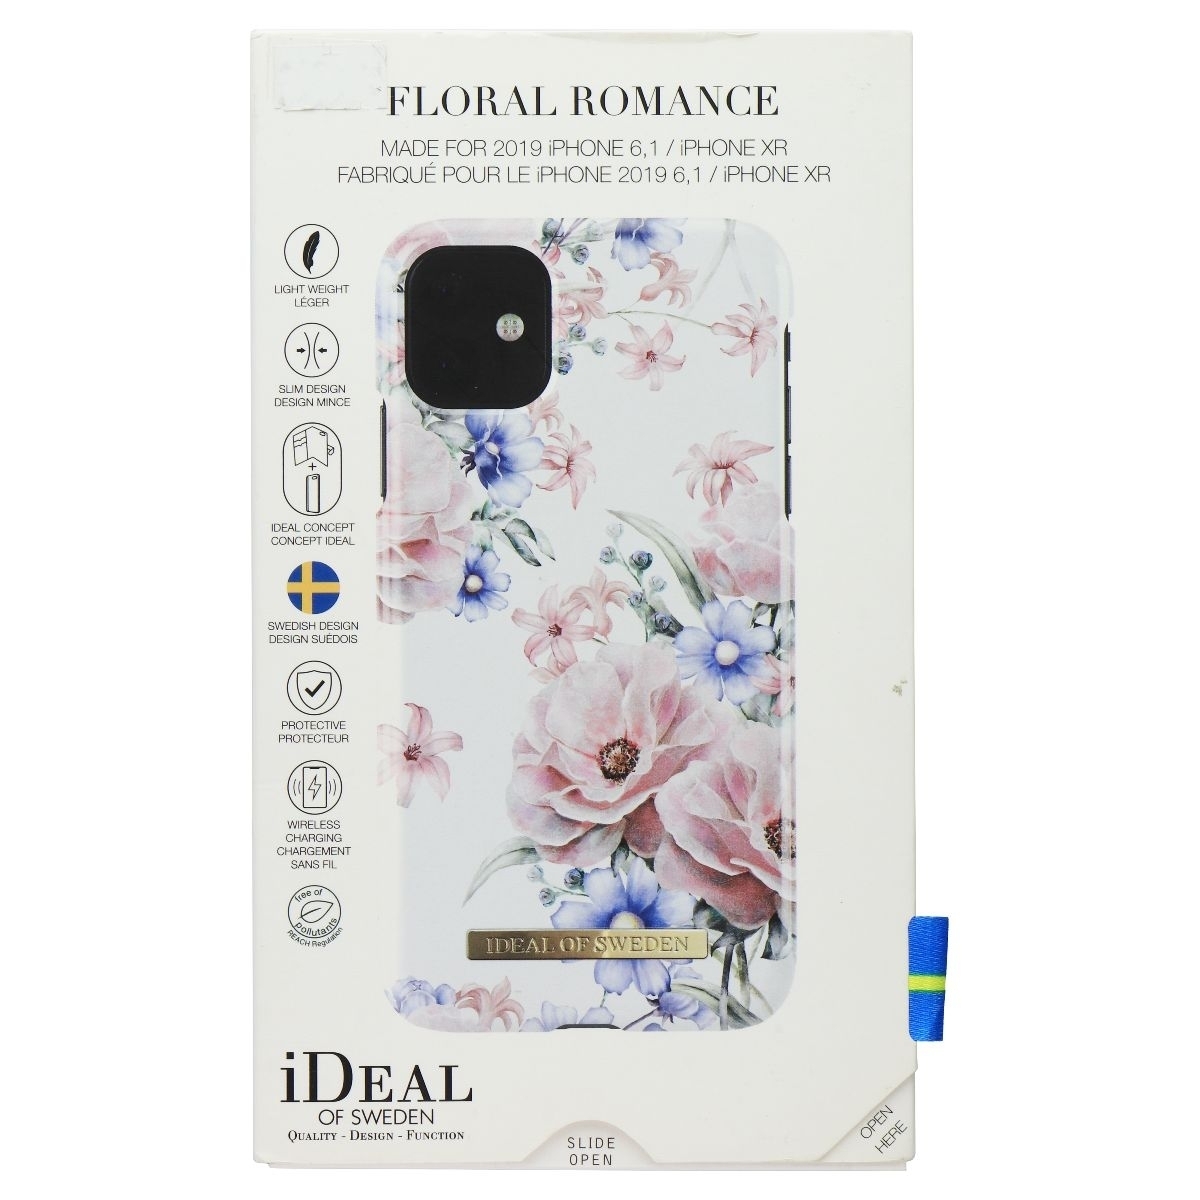 IDeal Of Swden Printed Hard Case For Apple IPhone 11 And XR - Floral Romance (Refurbished)